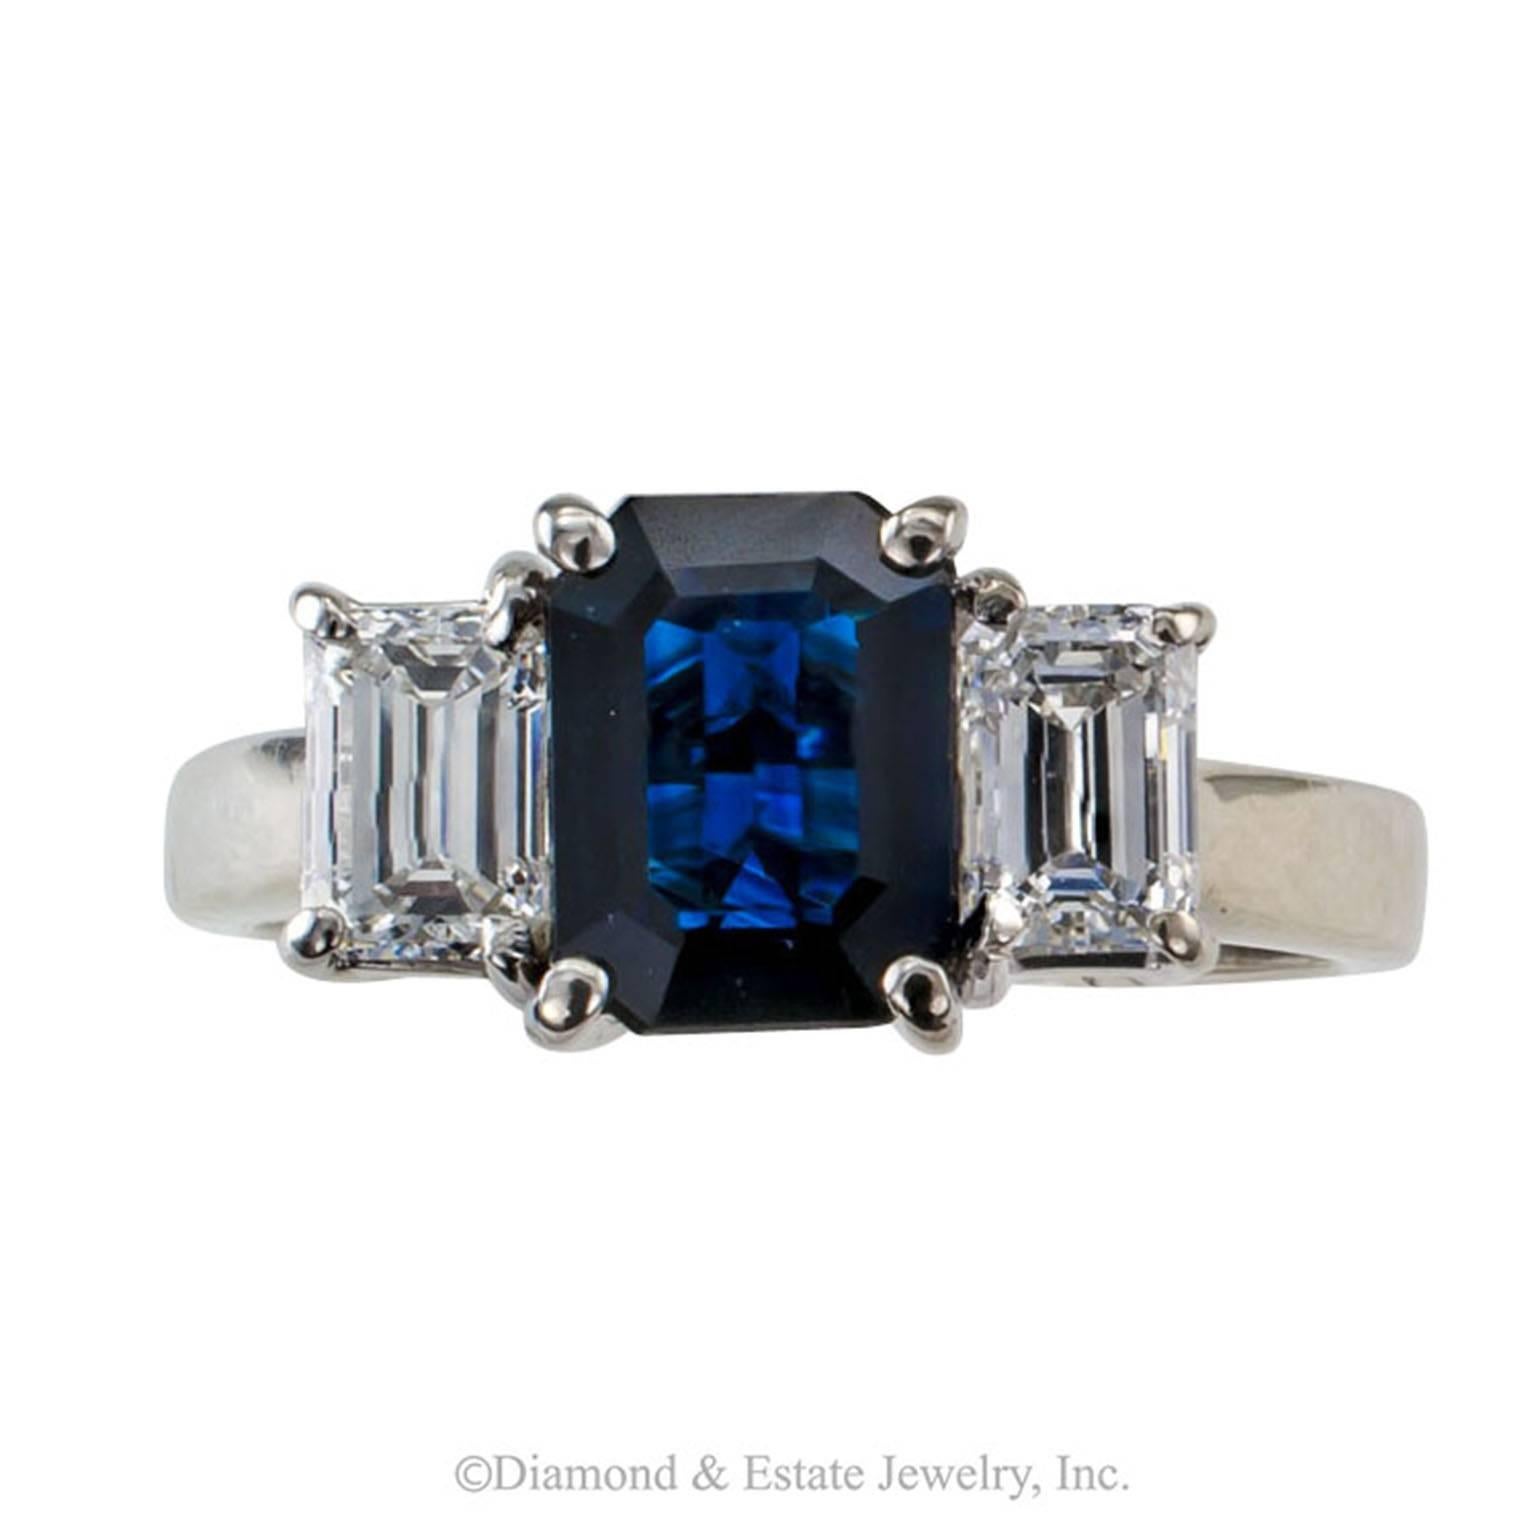 Emerald-Cut Blue Sapphire and Diamond Three-Stone Ring

Sapphire and diamond solitaire ring centering an emerald-cut blue sapphire weighing approximately 1.33 carats between a pair of similarly cut diamonds together totaling approximately 0.75